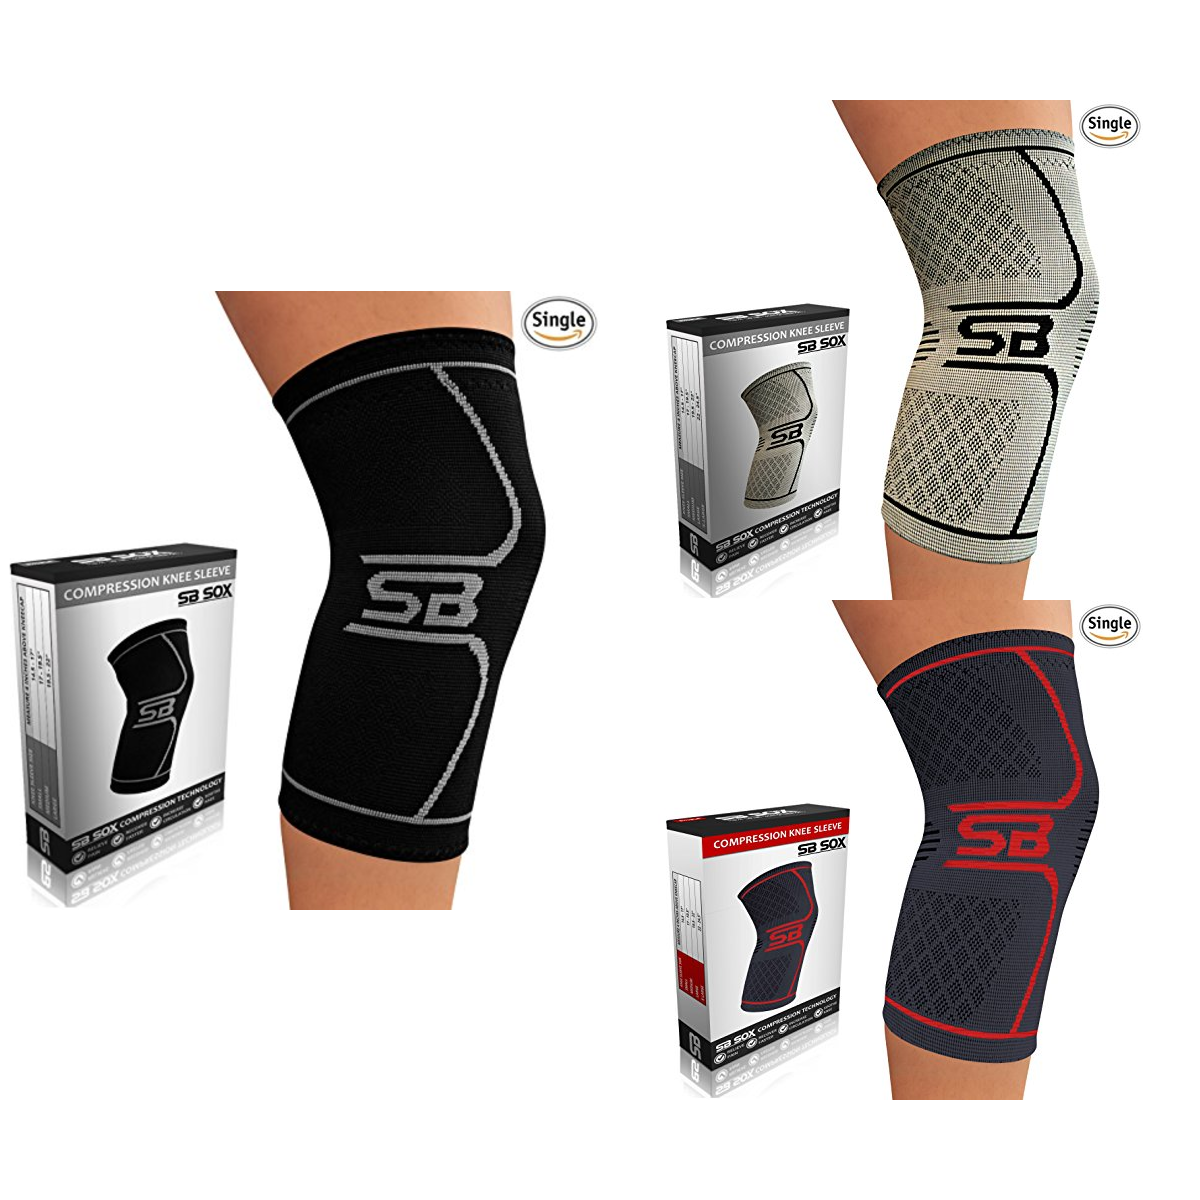 Compression Knee Sleeve - Best Knee Brace for Meniscus Tear and